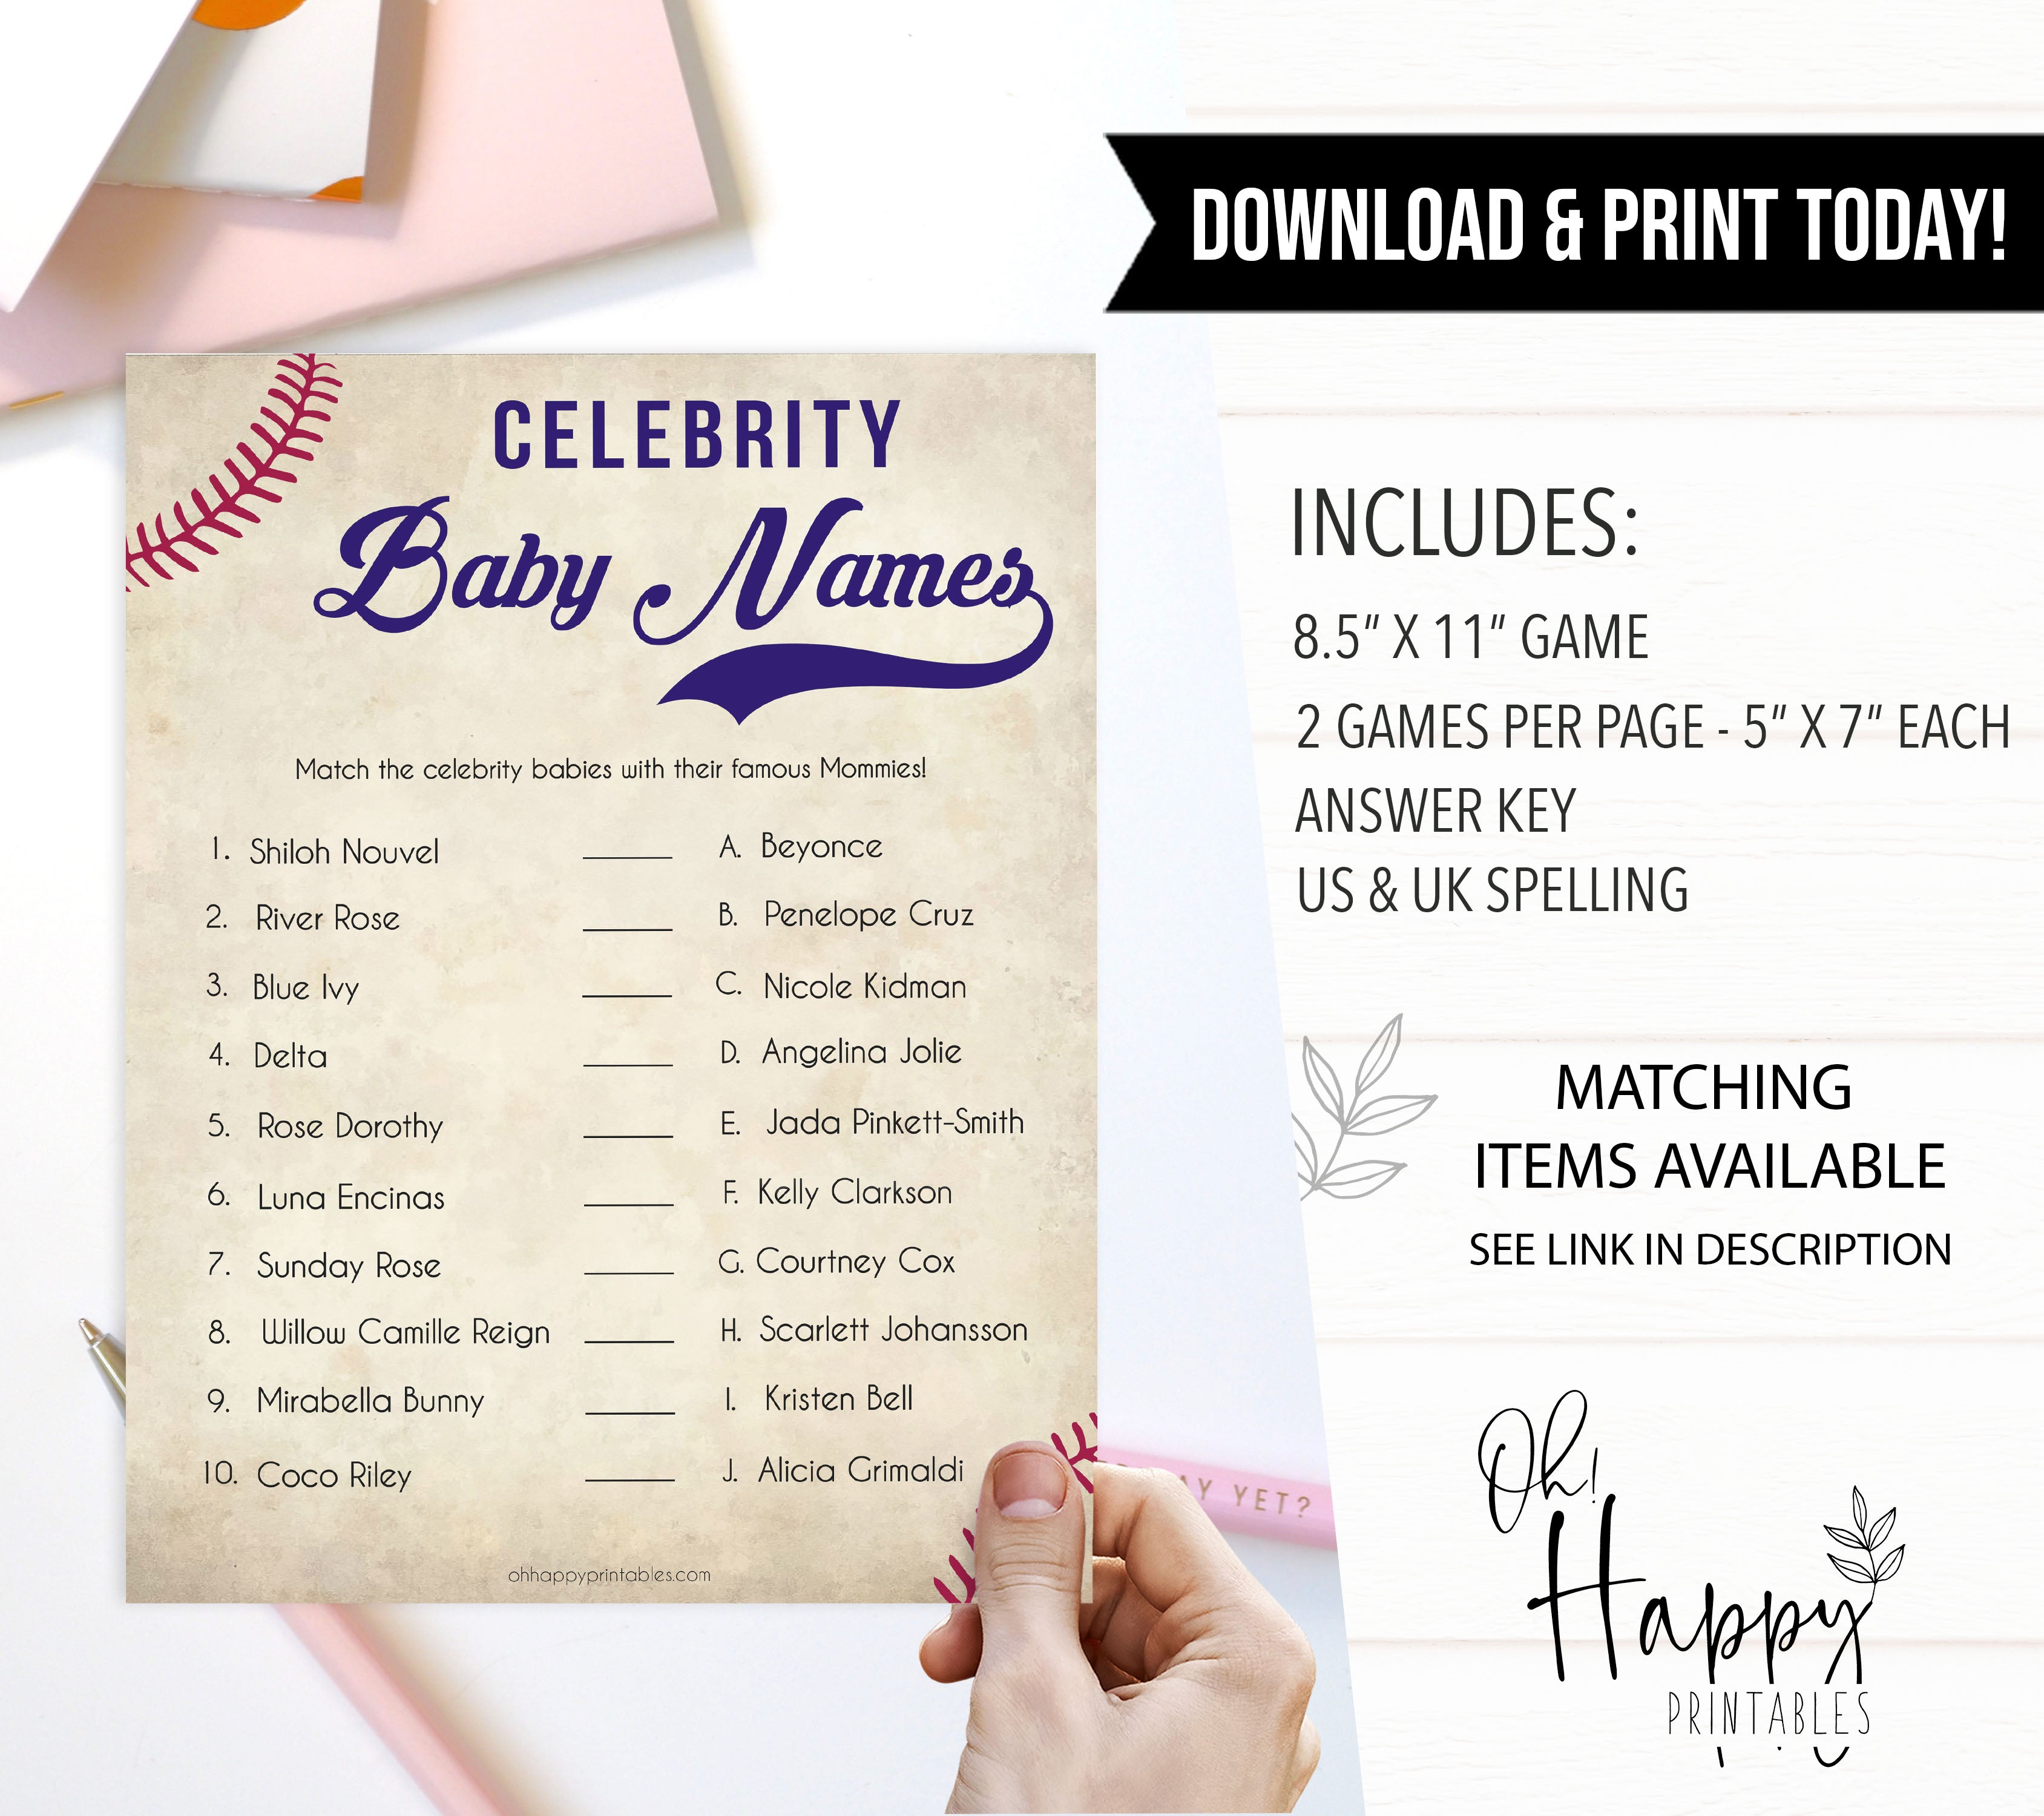 Baseball Celebrity Baby Names, Match Celebrity Babies, Famous Babies Game, Baby Shower Games, Guess the Celebrity Baby, Famous Baby, printable baby shower games, fun baby shower games, popular baby shower games